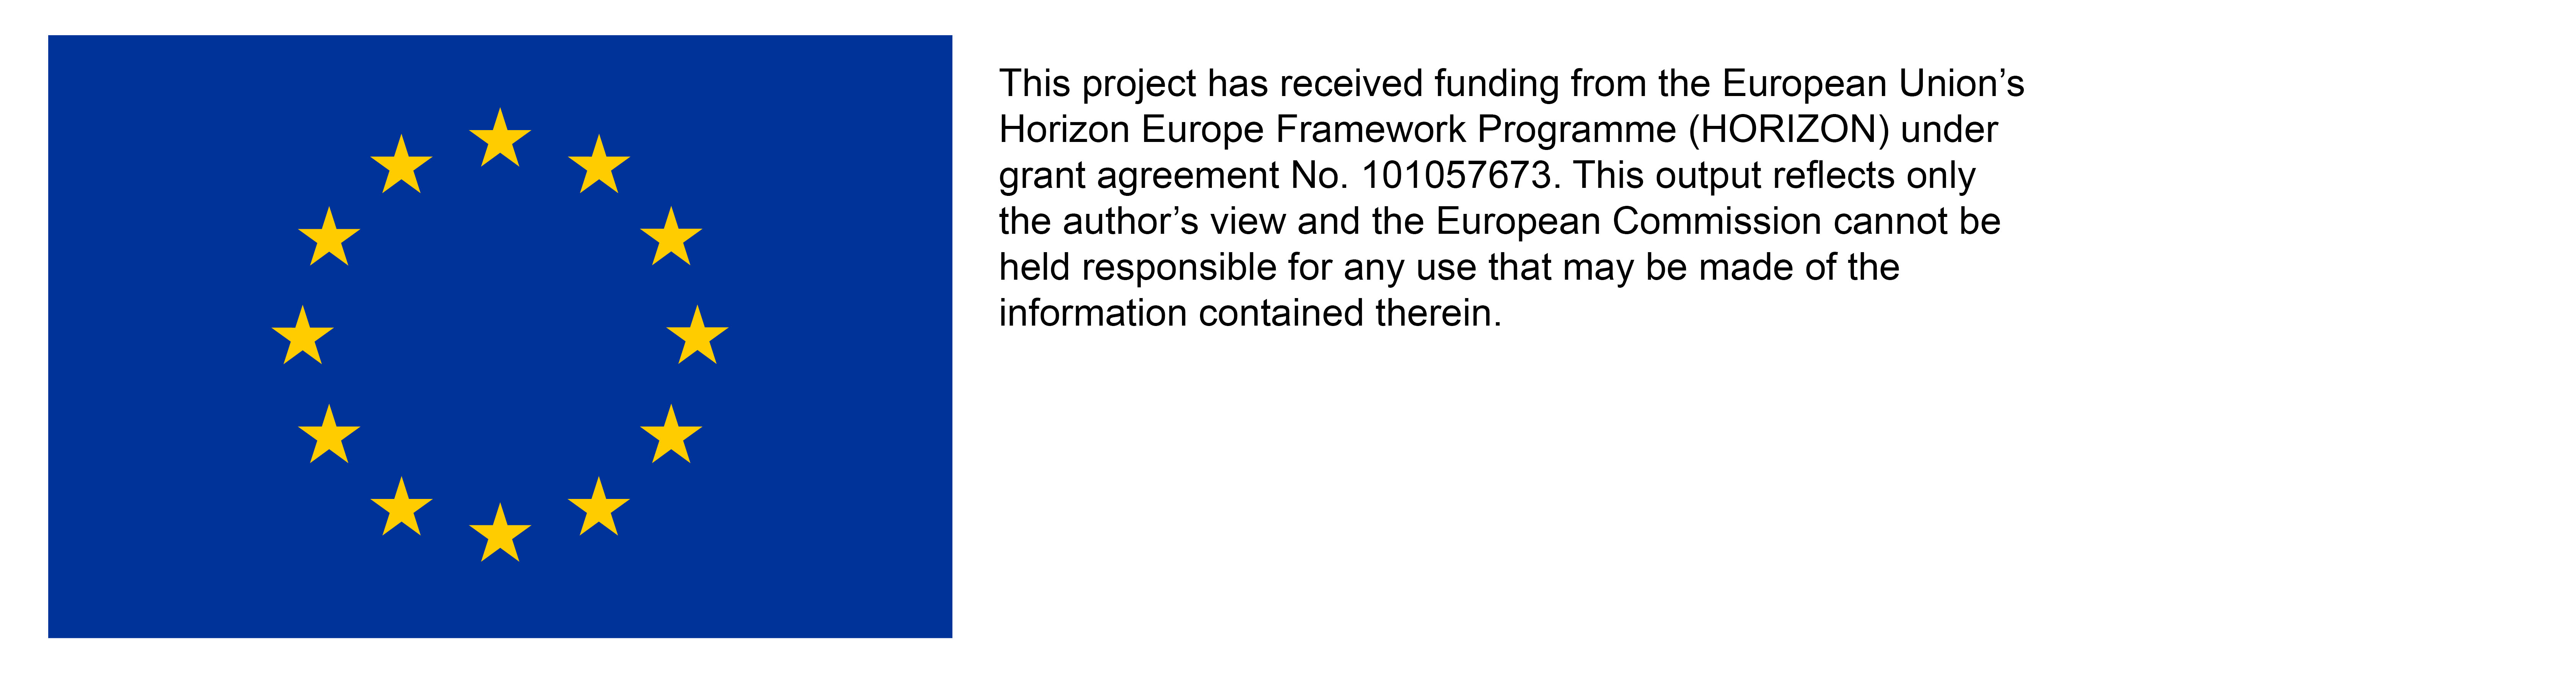 This project has received funding from the European Union’s Horizon Europe Framework Programme (HORIZON) under grant agreement No. 101057673. This output reflects only the author’s view and the European Commission cannot be held responsible for any use that may be made of the information contained therein. 